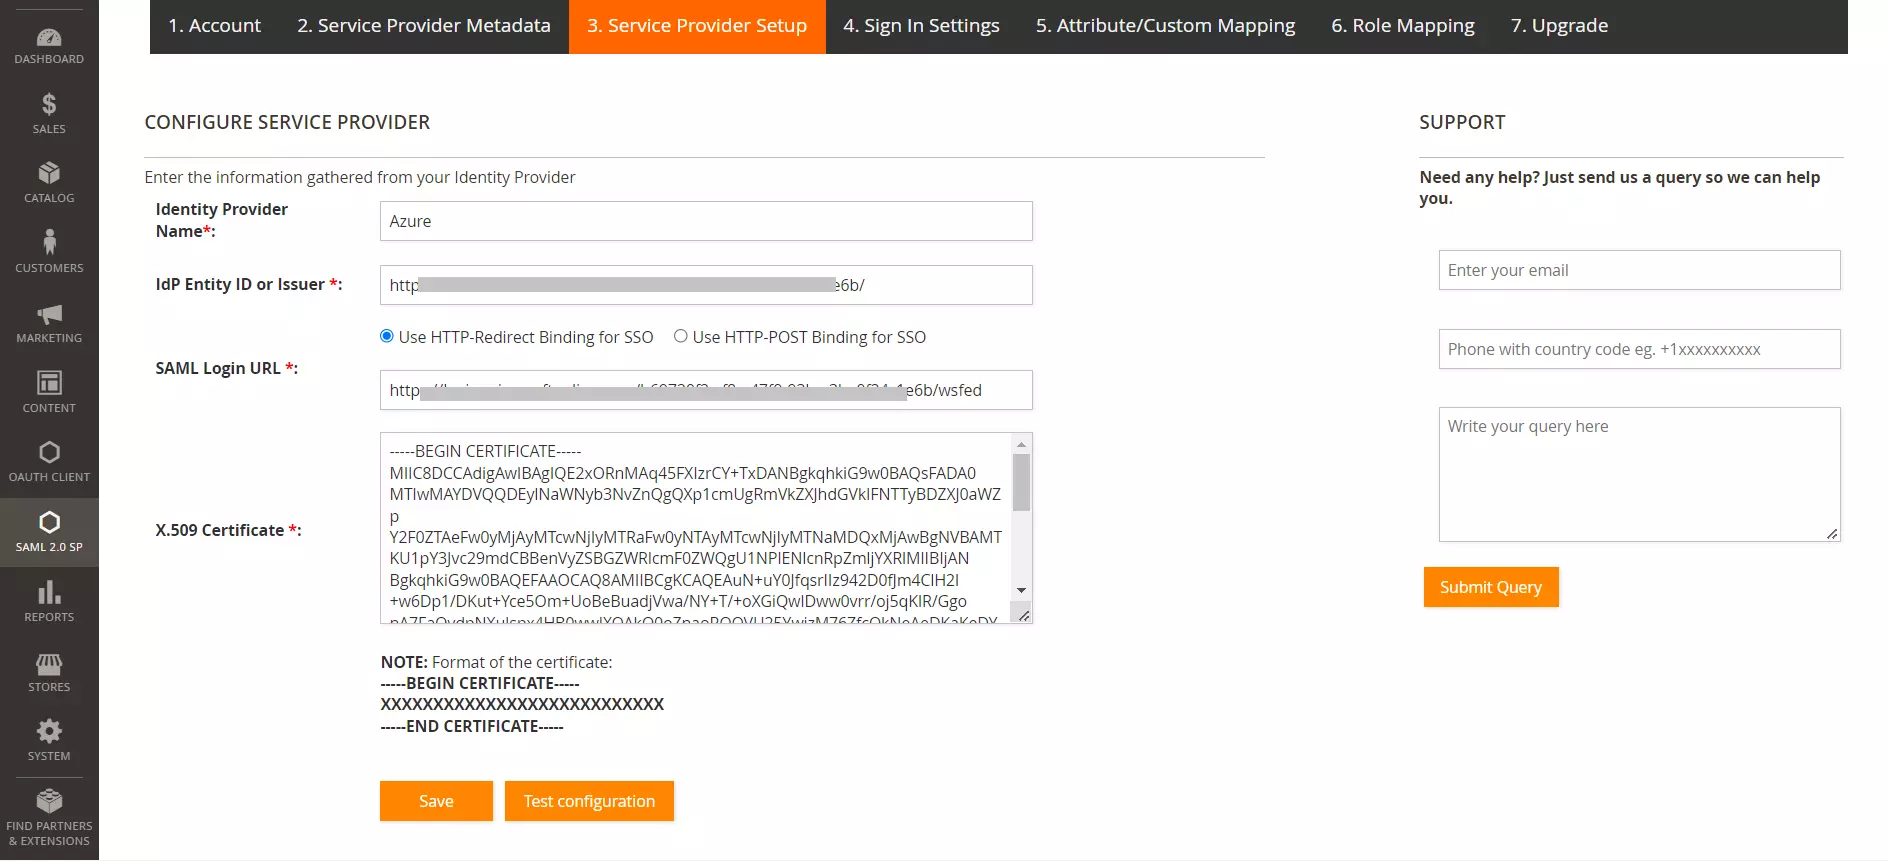 AuthAnvil Magento SSO - AuthAnvil Single Sign-On(SSO) Login in Magento - federation metadata